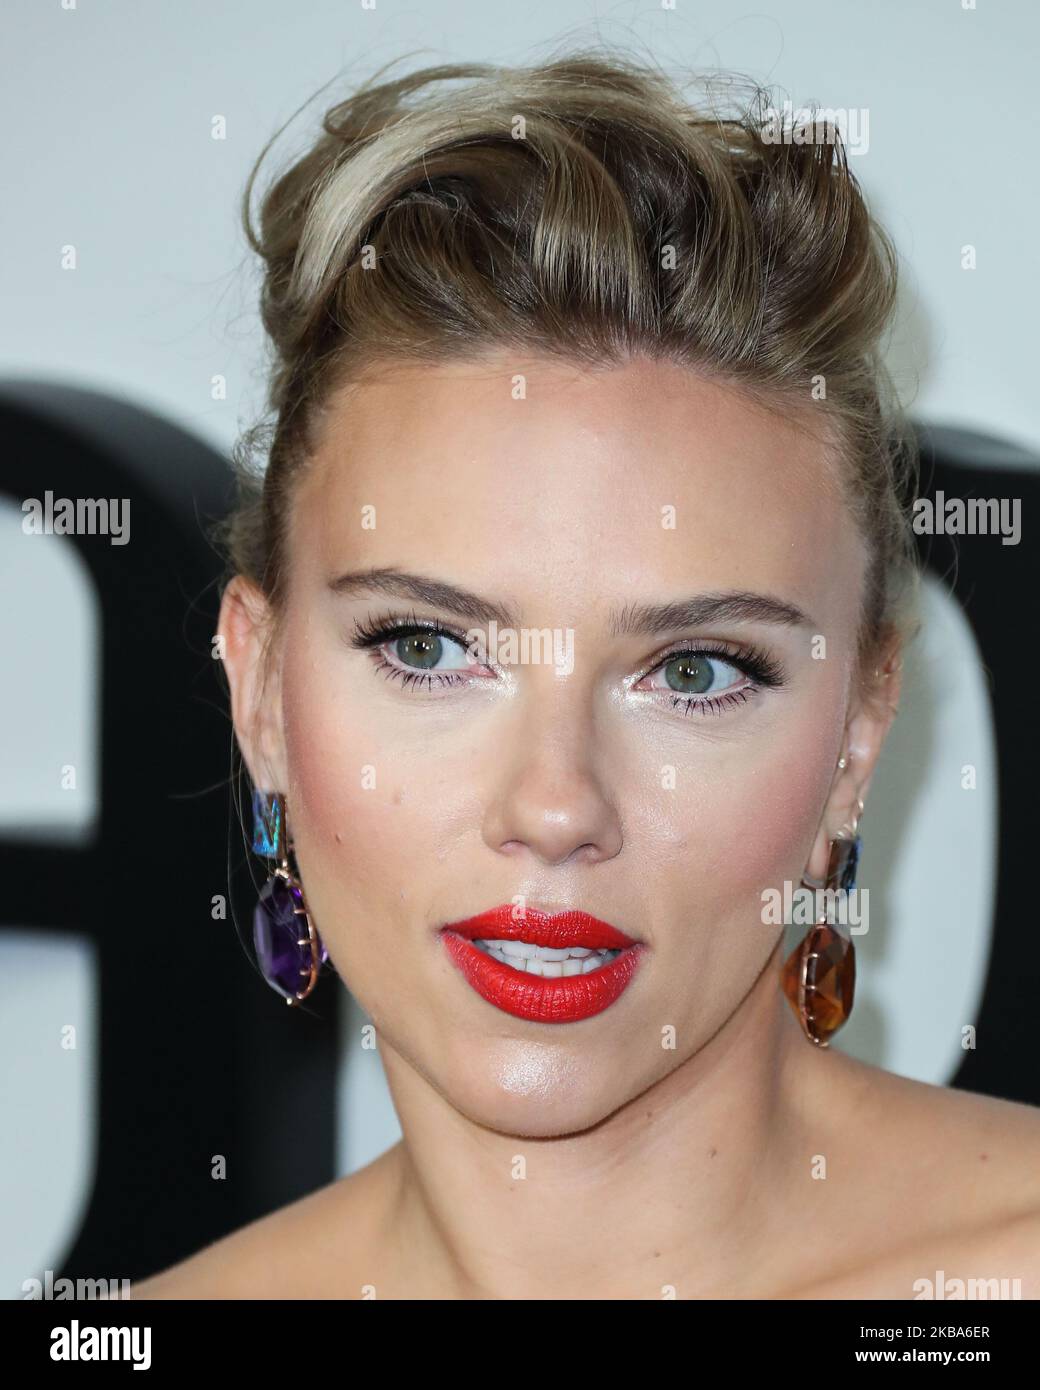 WEST HOLLYWOOD, LOS ANGELES, CALIFORNIA, USA - NOVEMBER 05: Actress  Scarlett Johansson wearing Louis Vuitton with Taffin jewelry arrives at the  Los Angeles Premiere Of Netflix's 'Marriage Story' held at the Directors